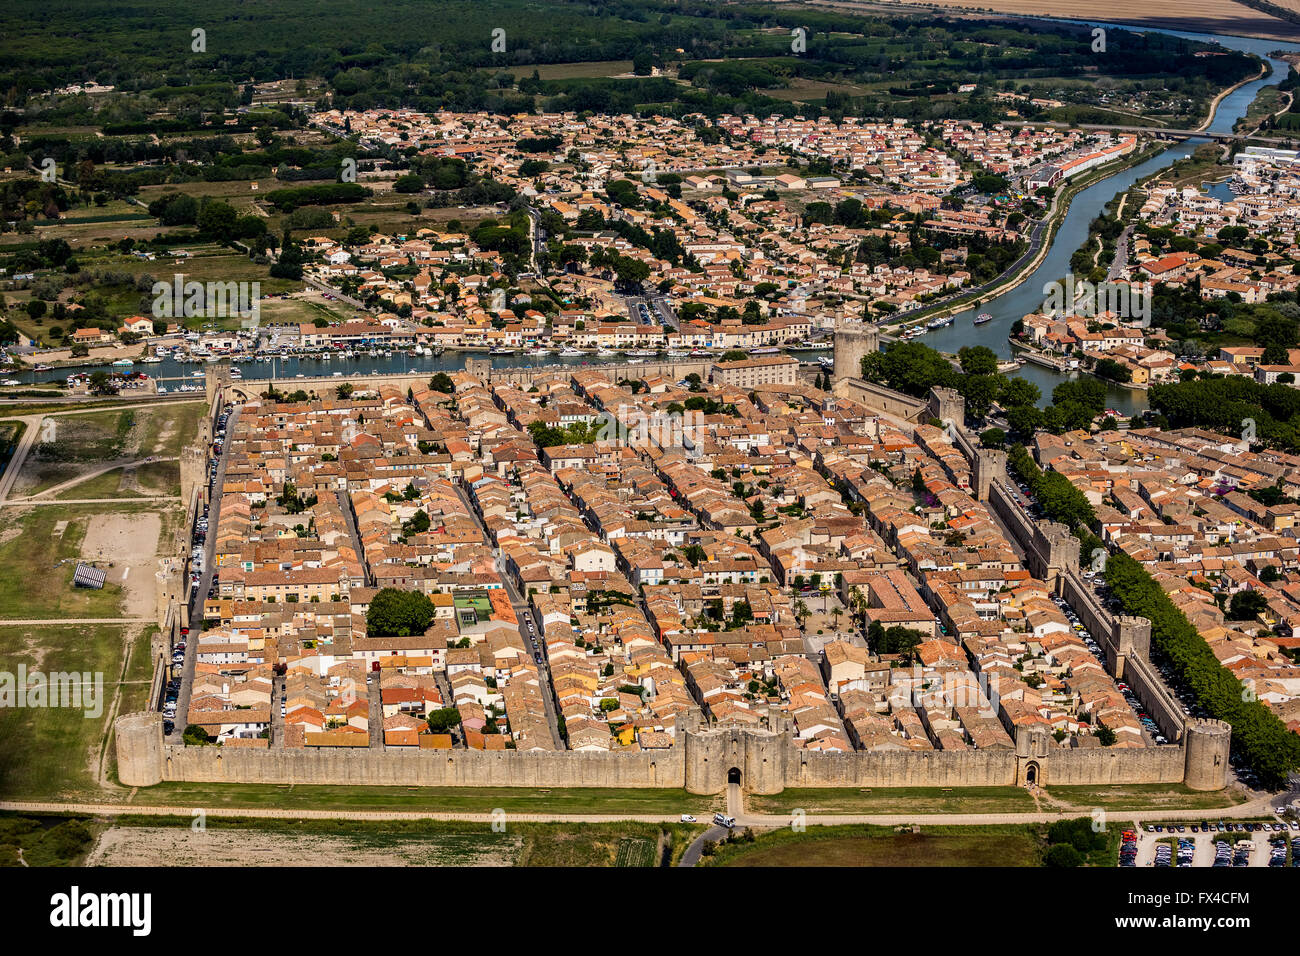 Aerial view, Medieval town with a rectangular walled city, southern France, Midi, Aigues-Mortes, France, Languedoc-Roussillon, Stock Photo